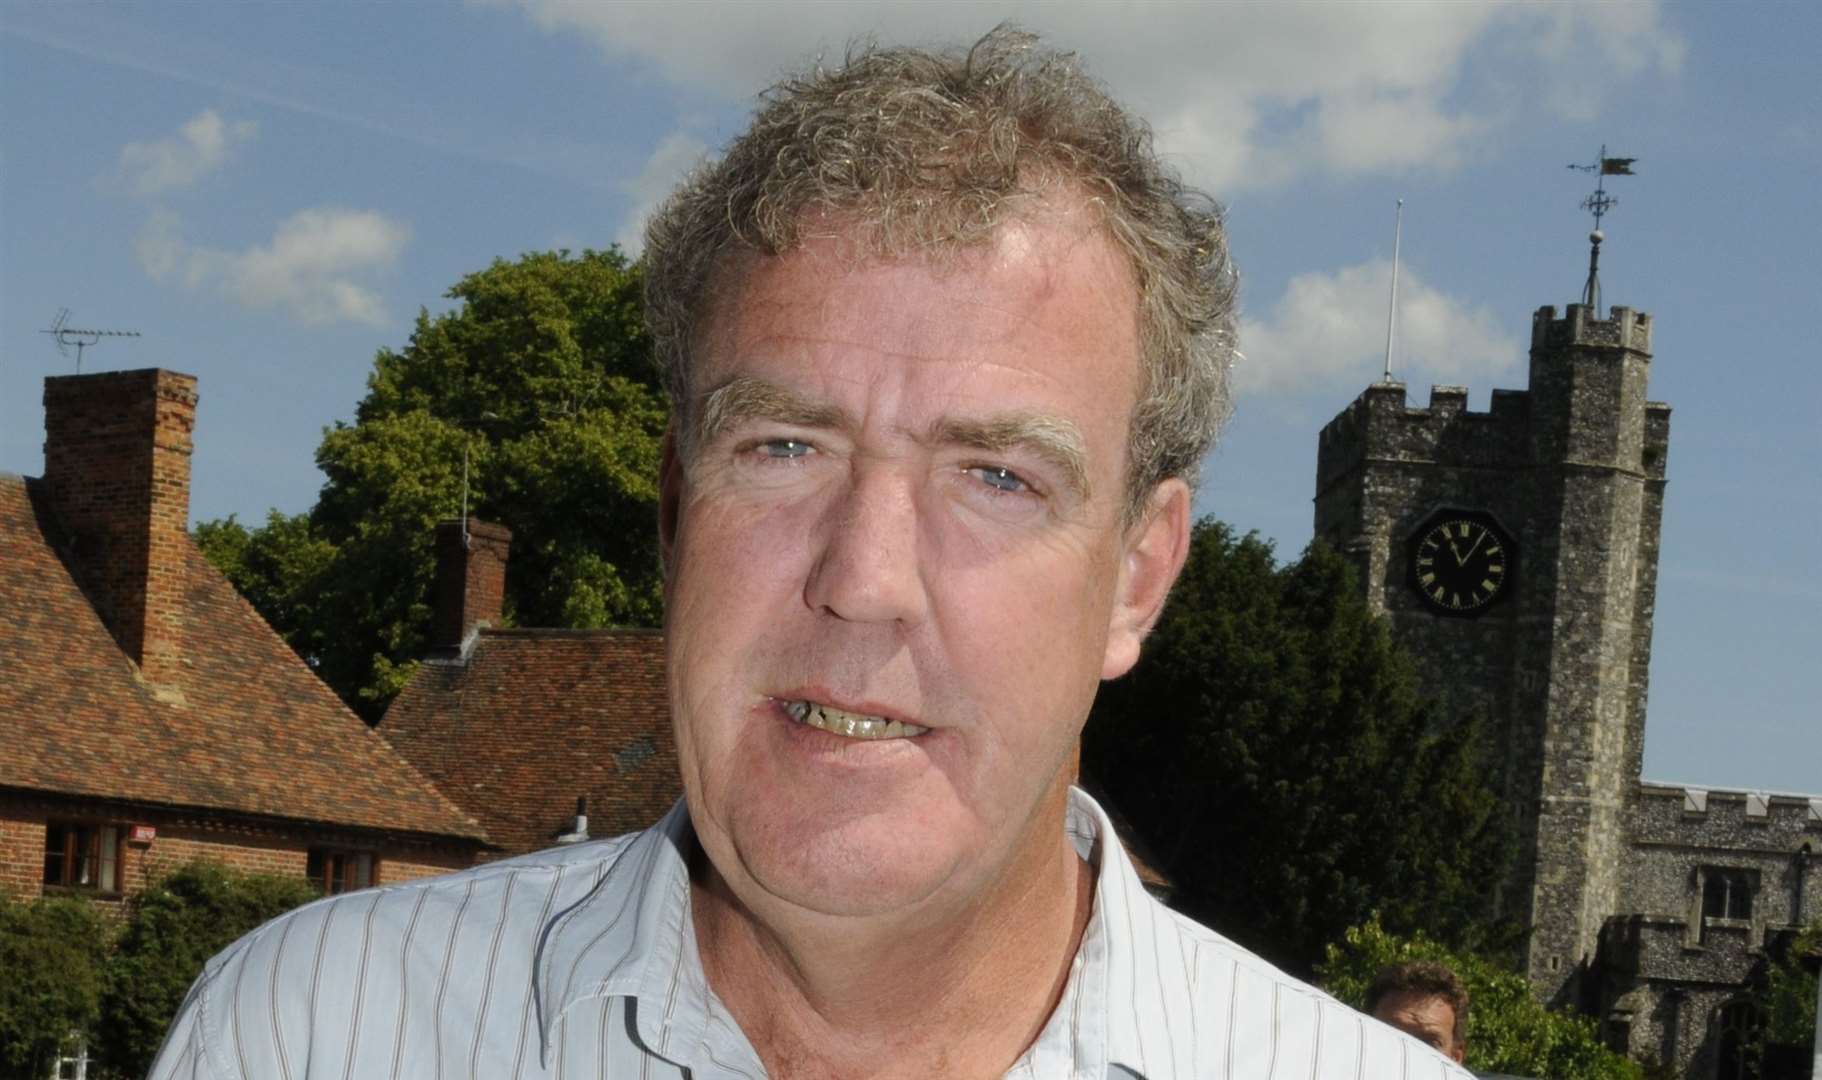 Former Top Gear host Jeremy Clarkson was staying at Eastwell Manor when he tweeted about the speed humps